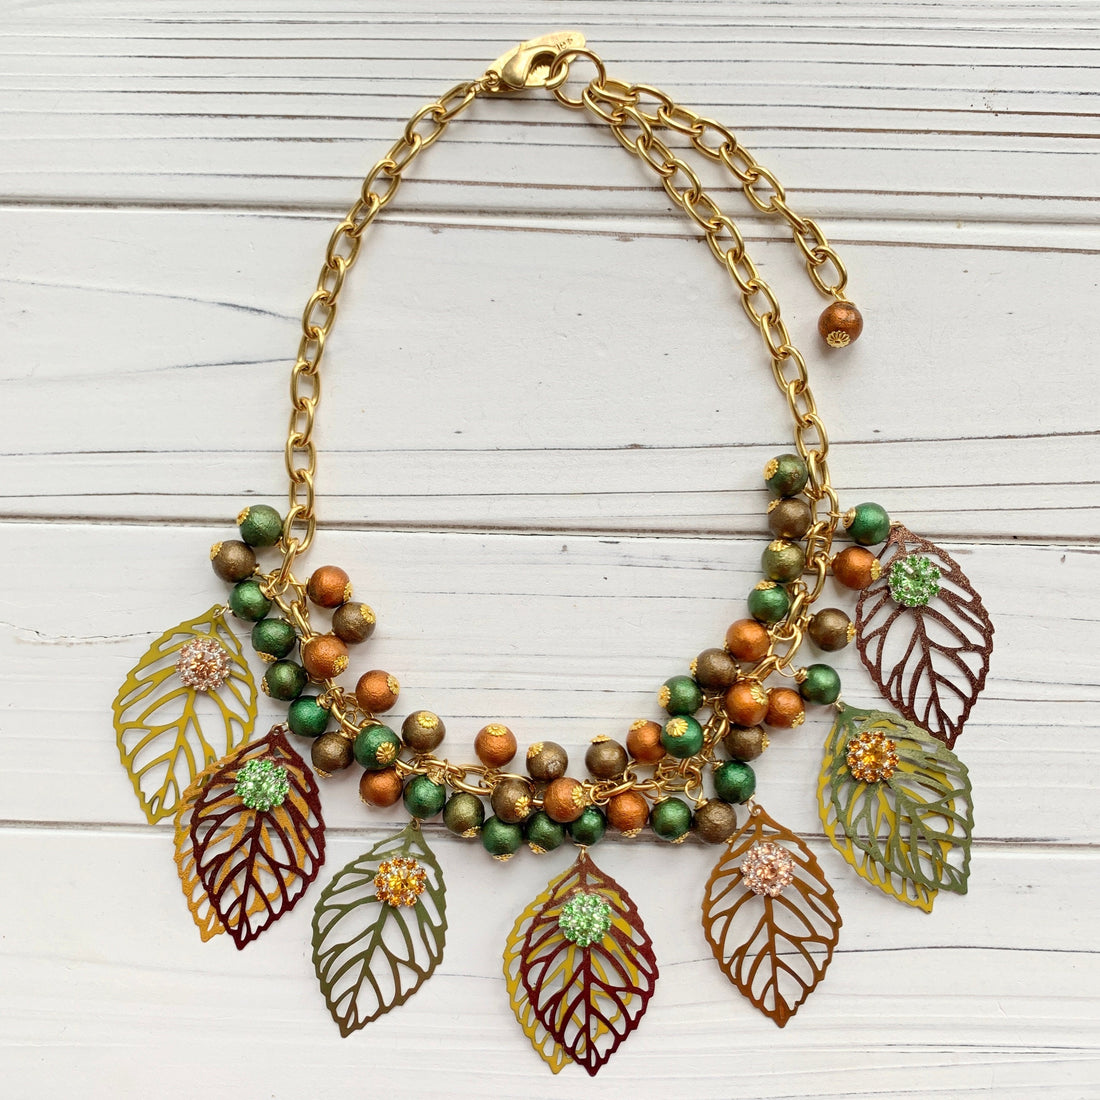 Lenora Dame Fall Leaf Necklace